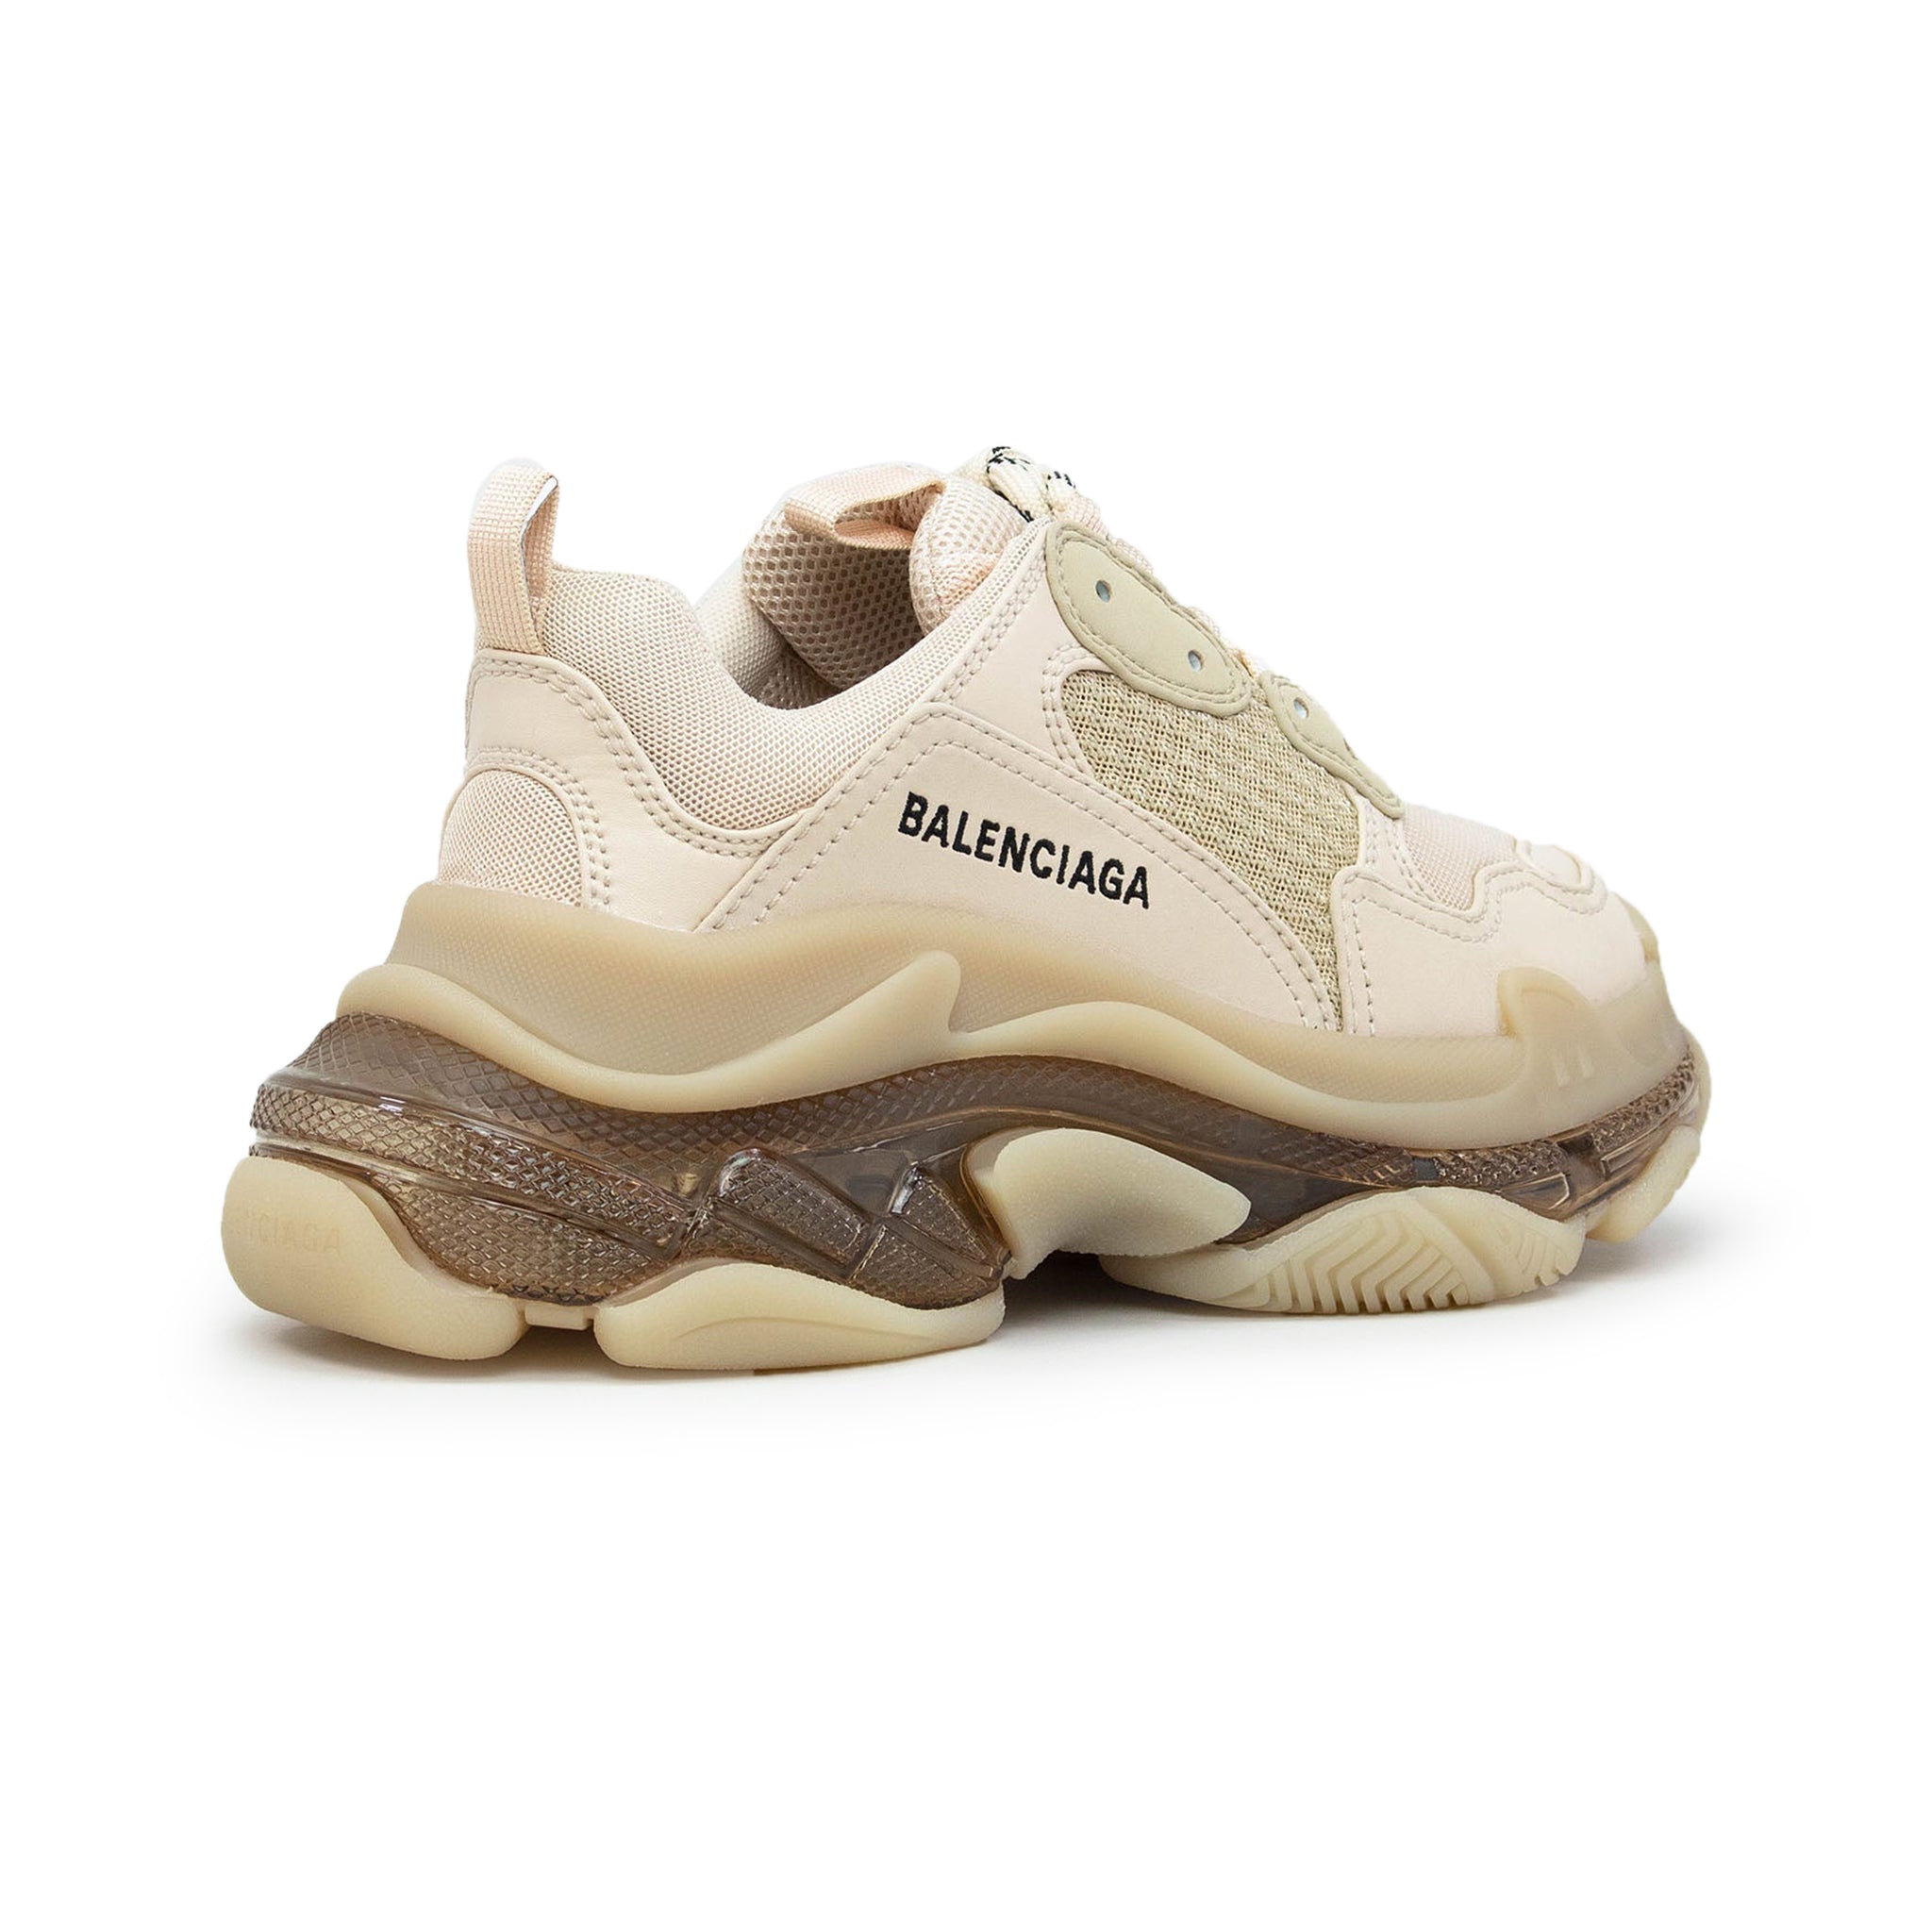 Balenciagas Paris sneaker and the problem with the poor aesthetic   Thred Website